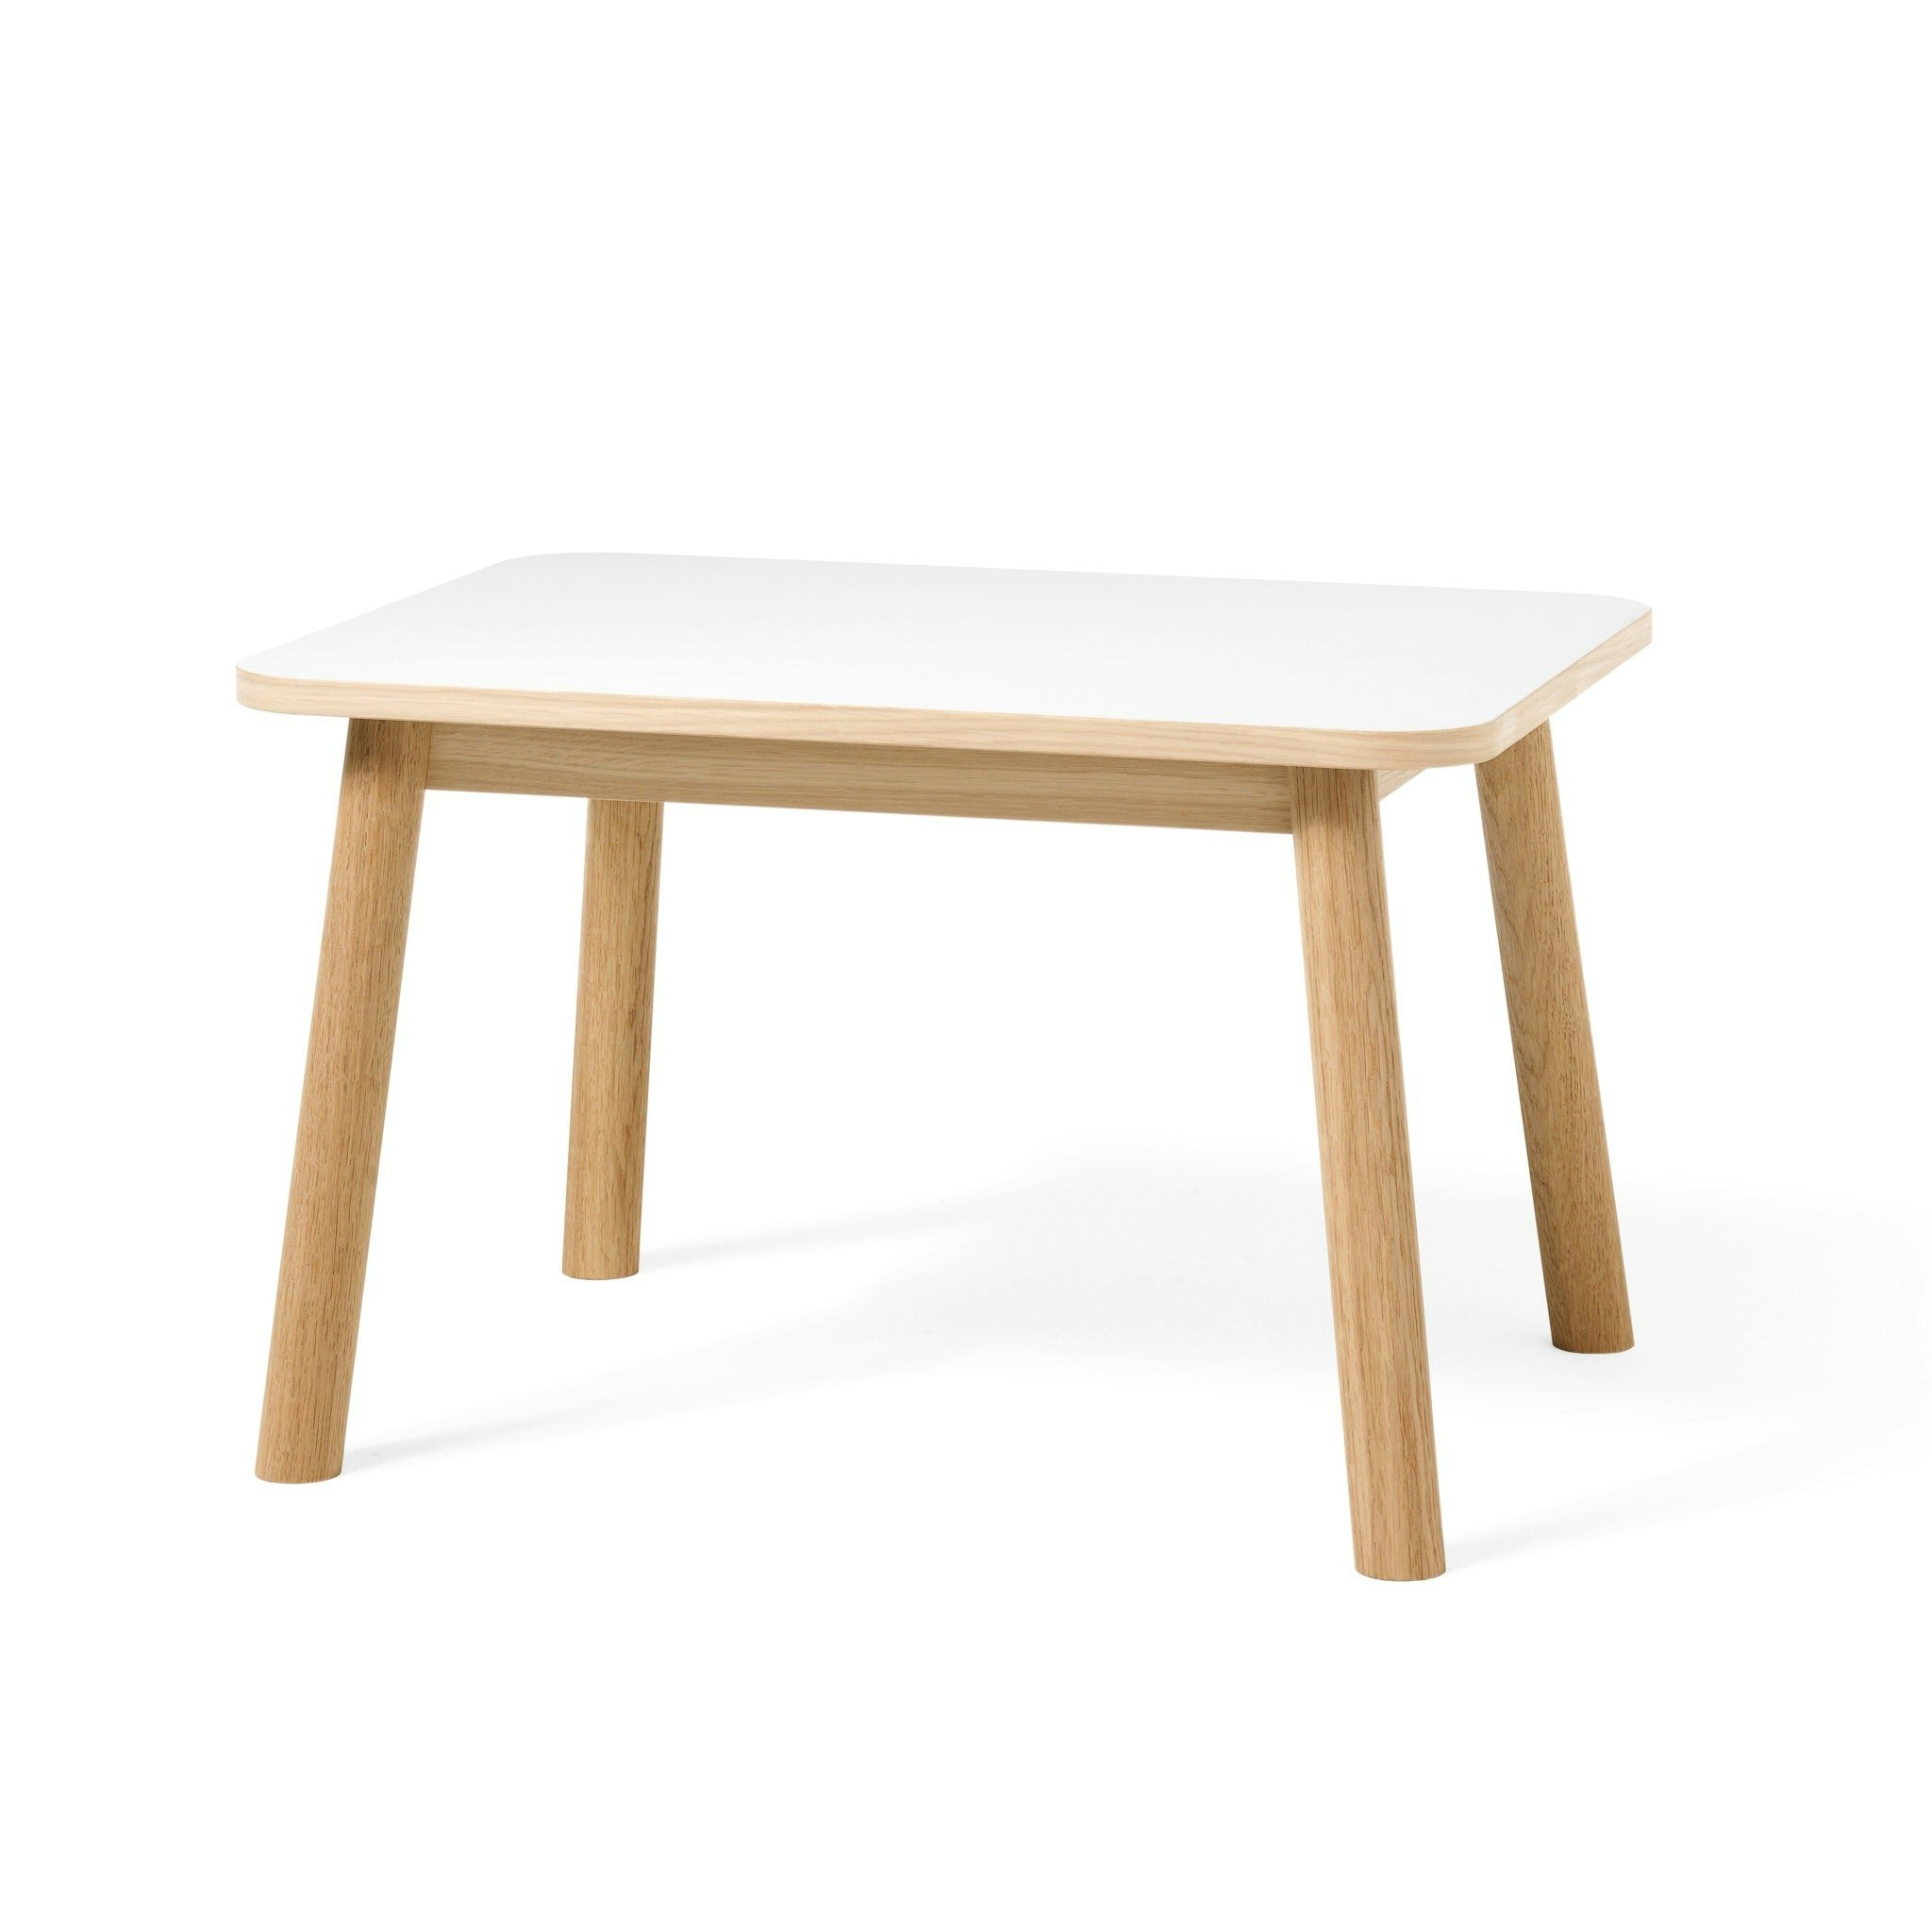 Mino Small Side Table by Zweed